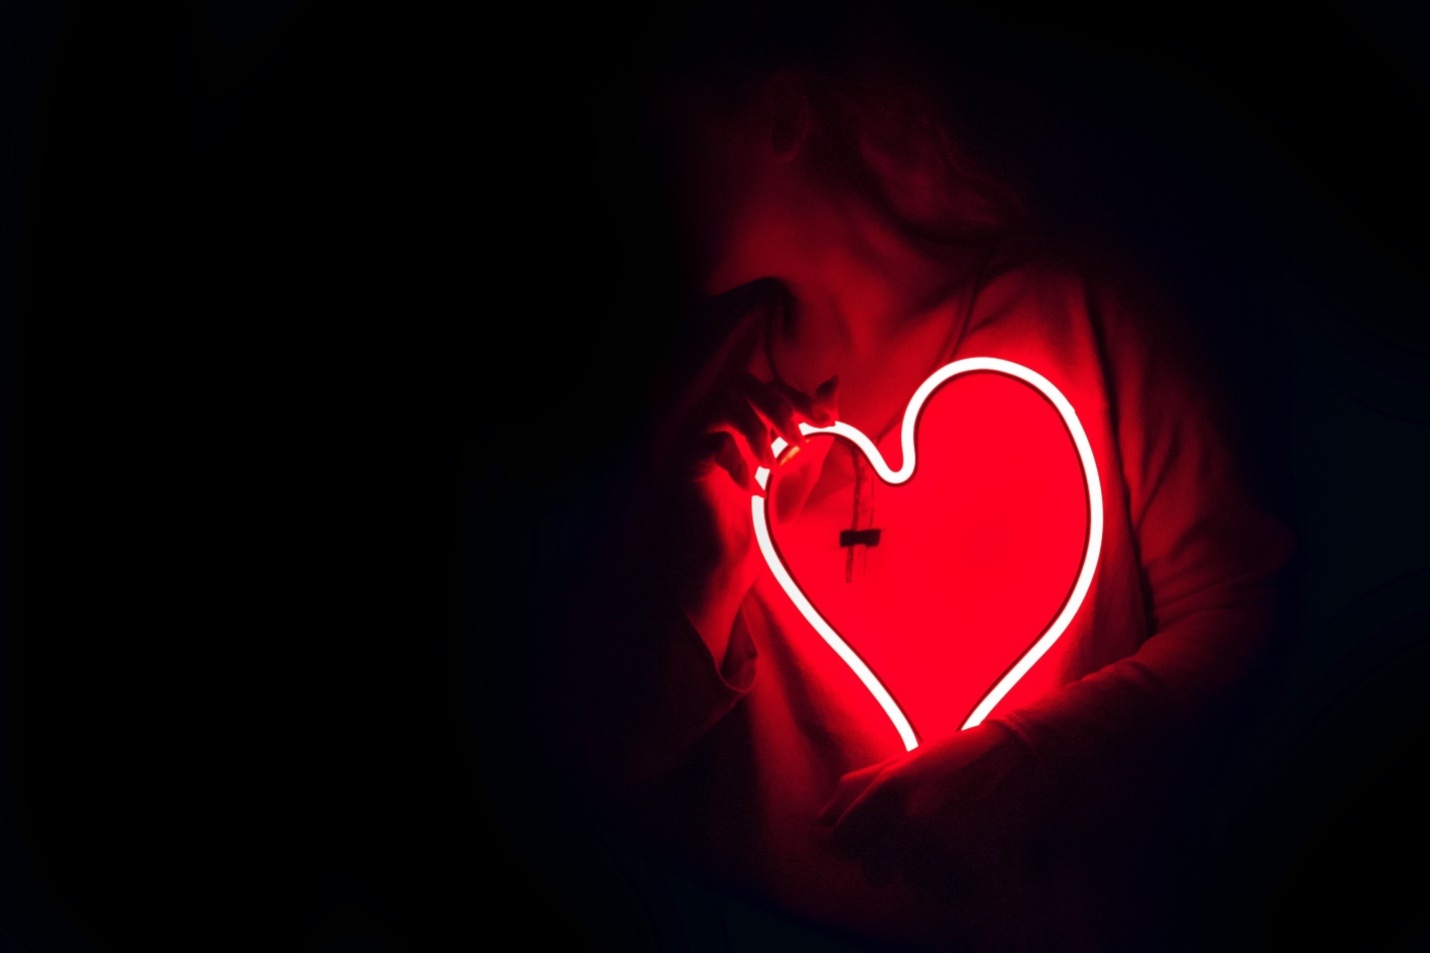 A person holding a heart-shaped light